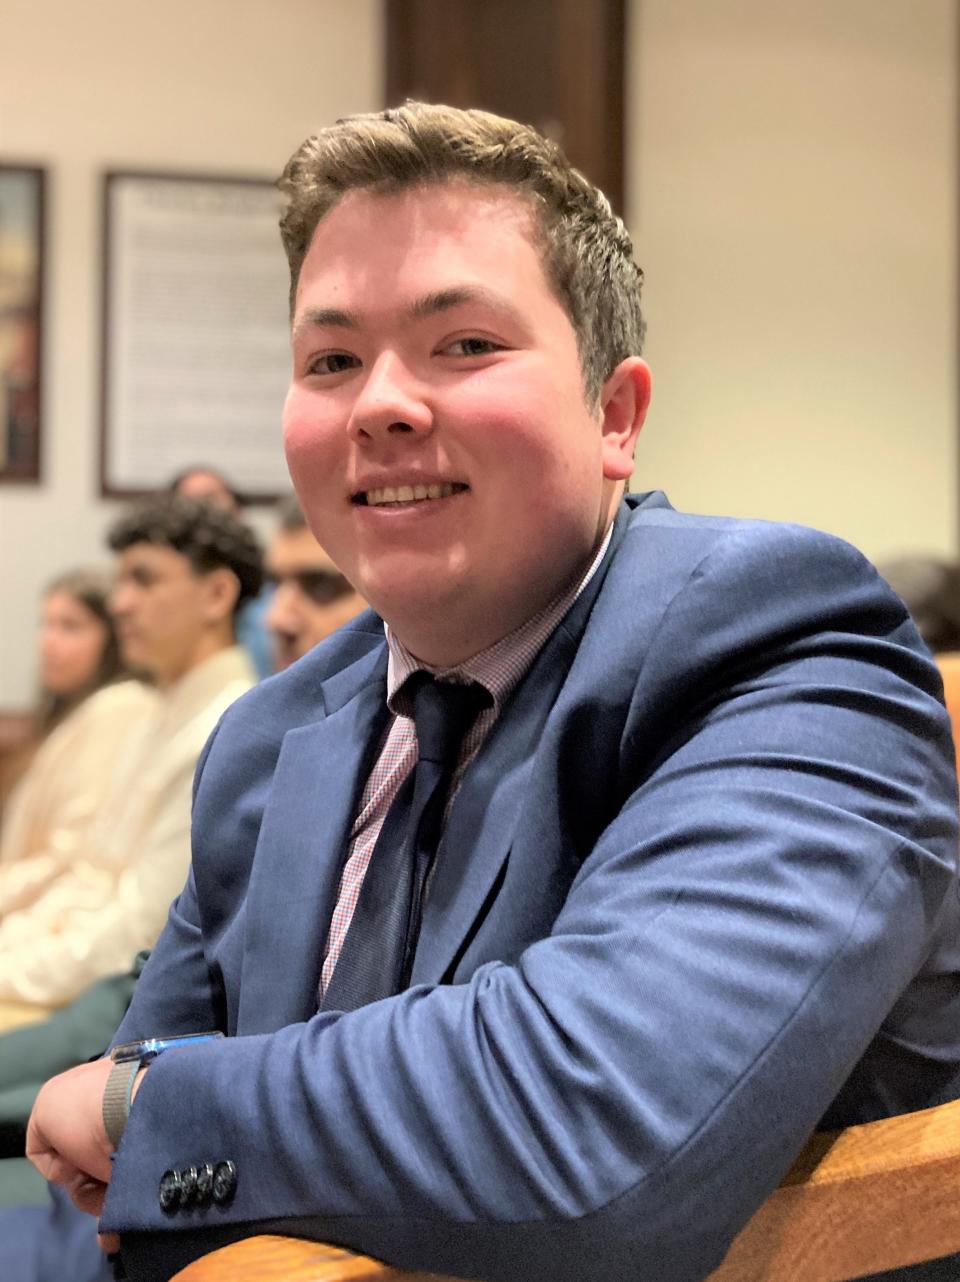 Worcester resident Daniel Mara attended the Joint Committee on Education Wednesday to urge legislators to establish personal finance classes as a graduation requirement